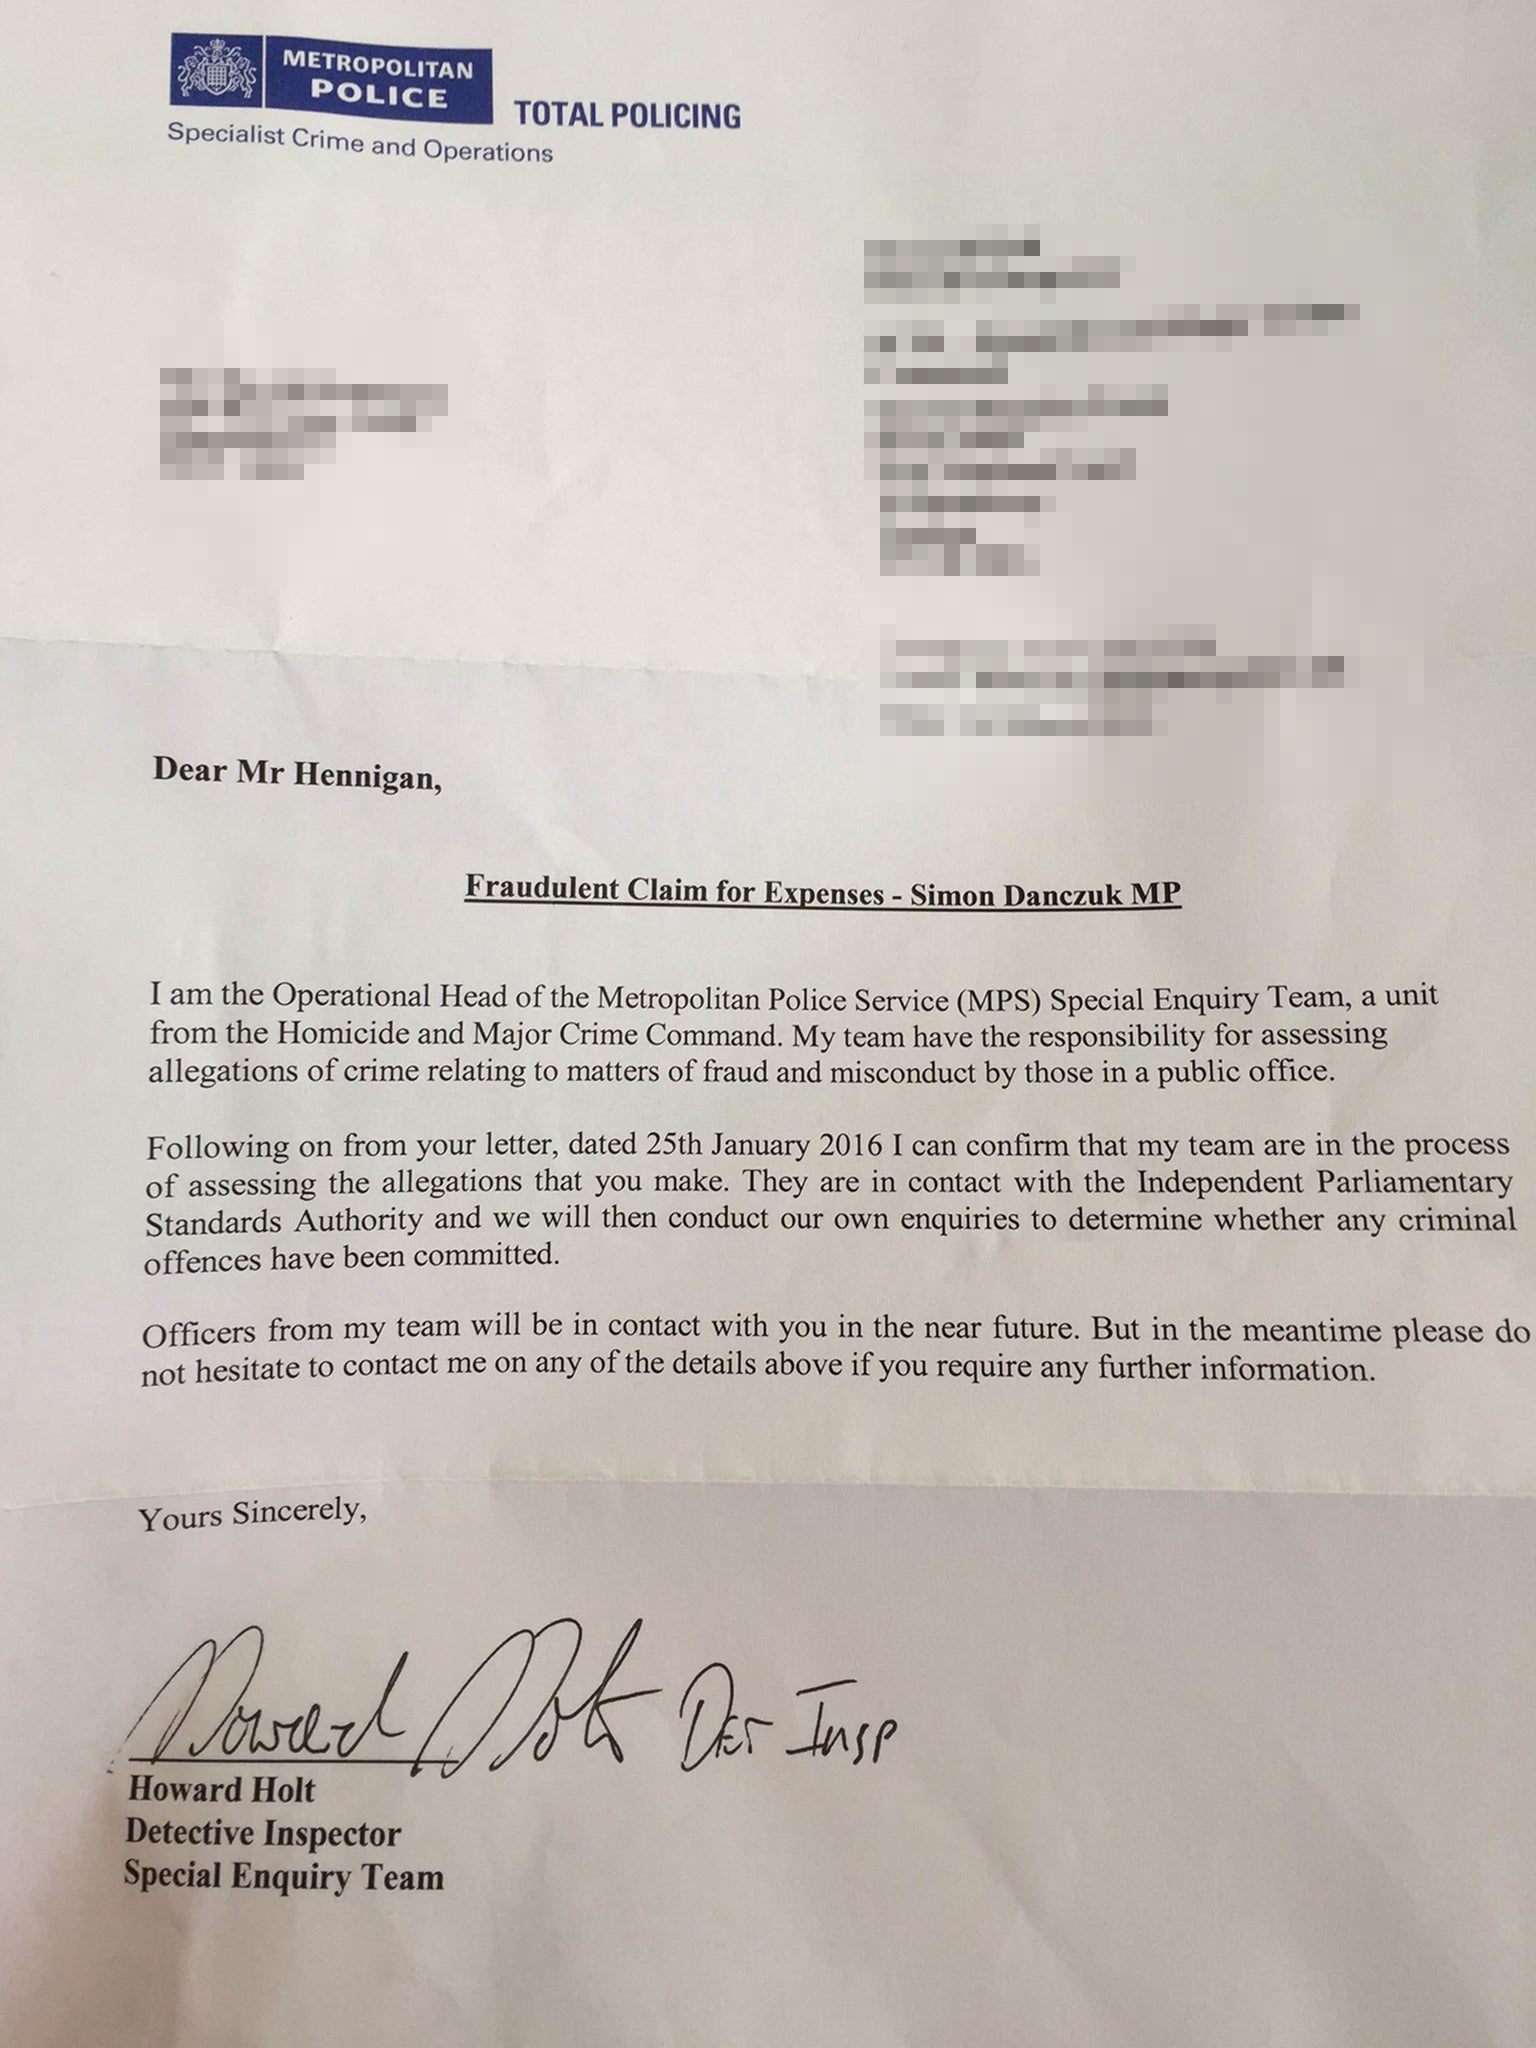 The letter to Mr Hennigan from London Metropolitan Police